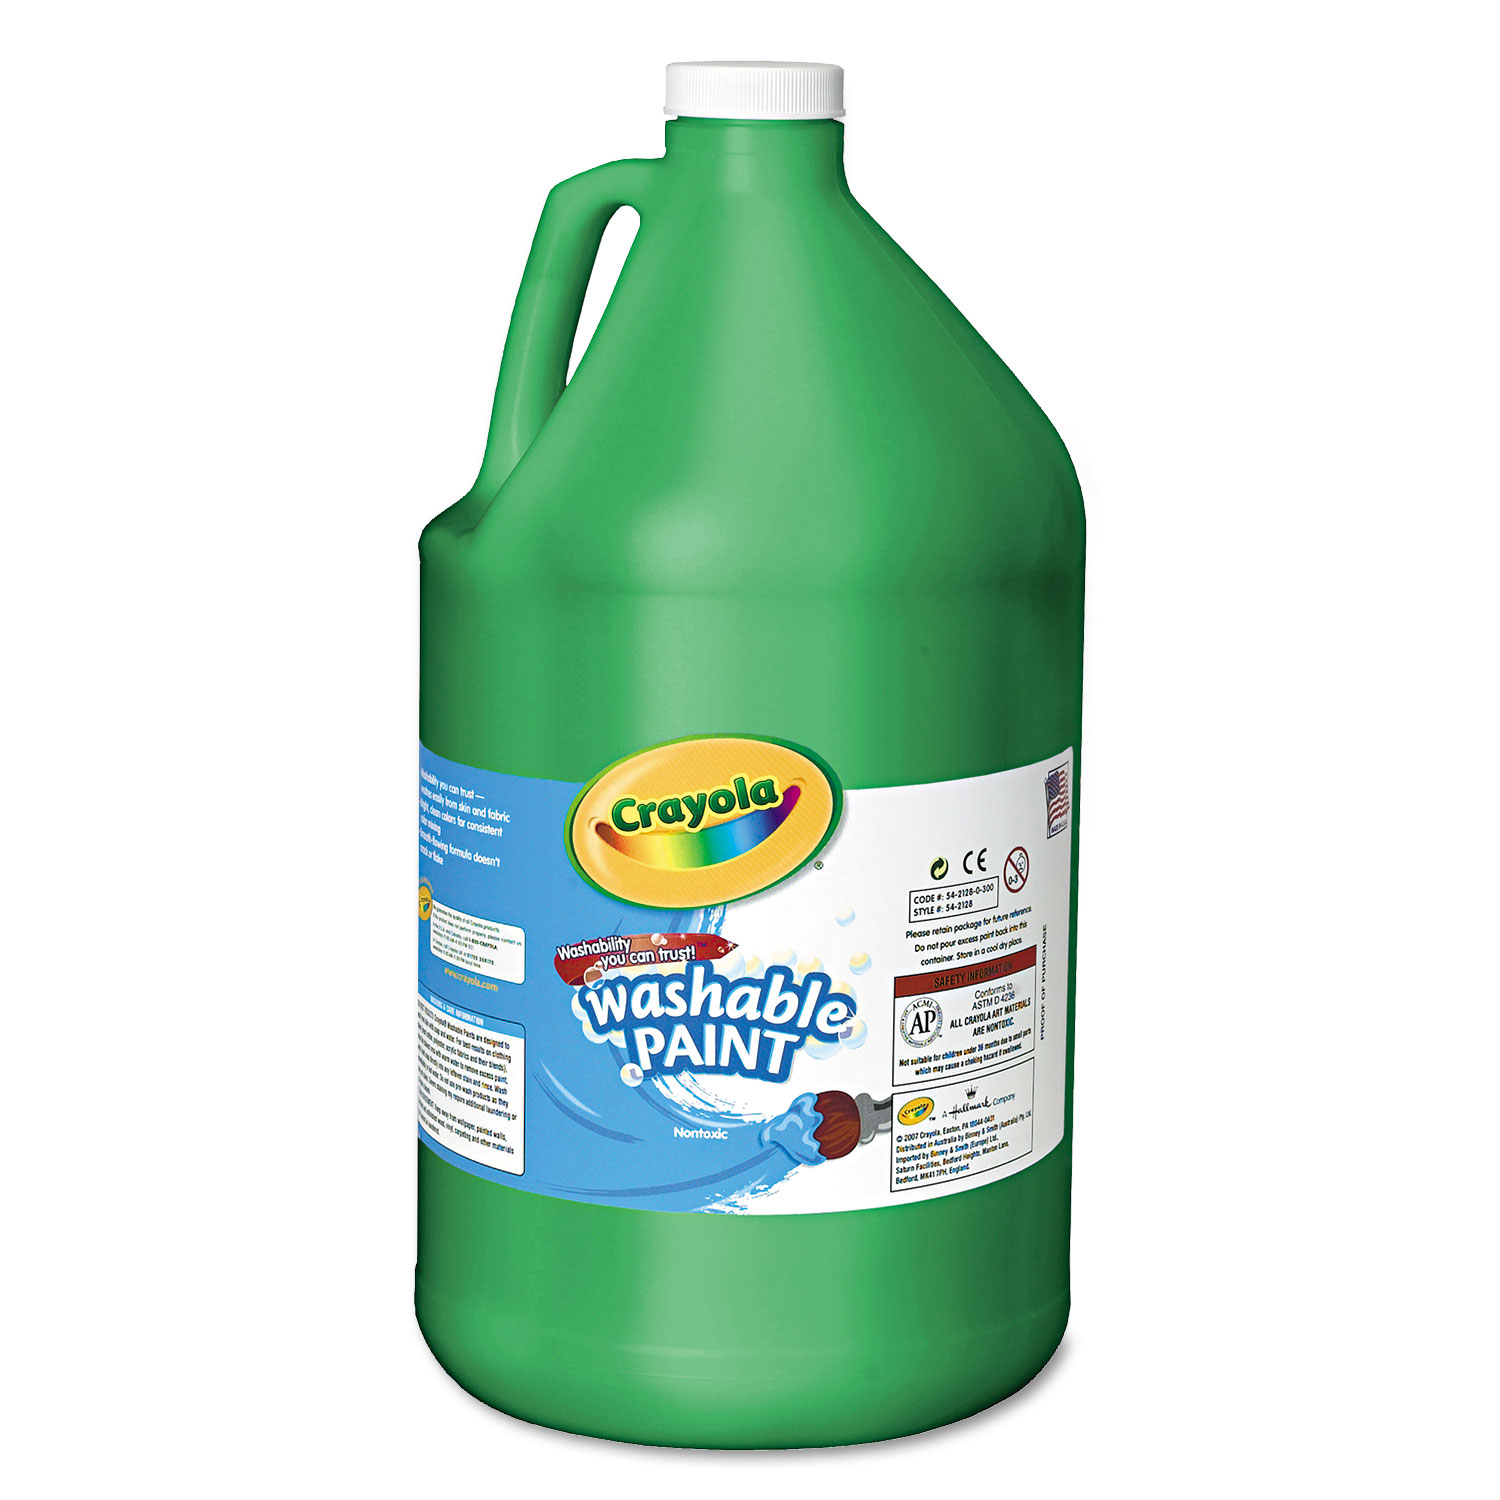 Washable Paint, Green, 1 gal